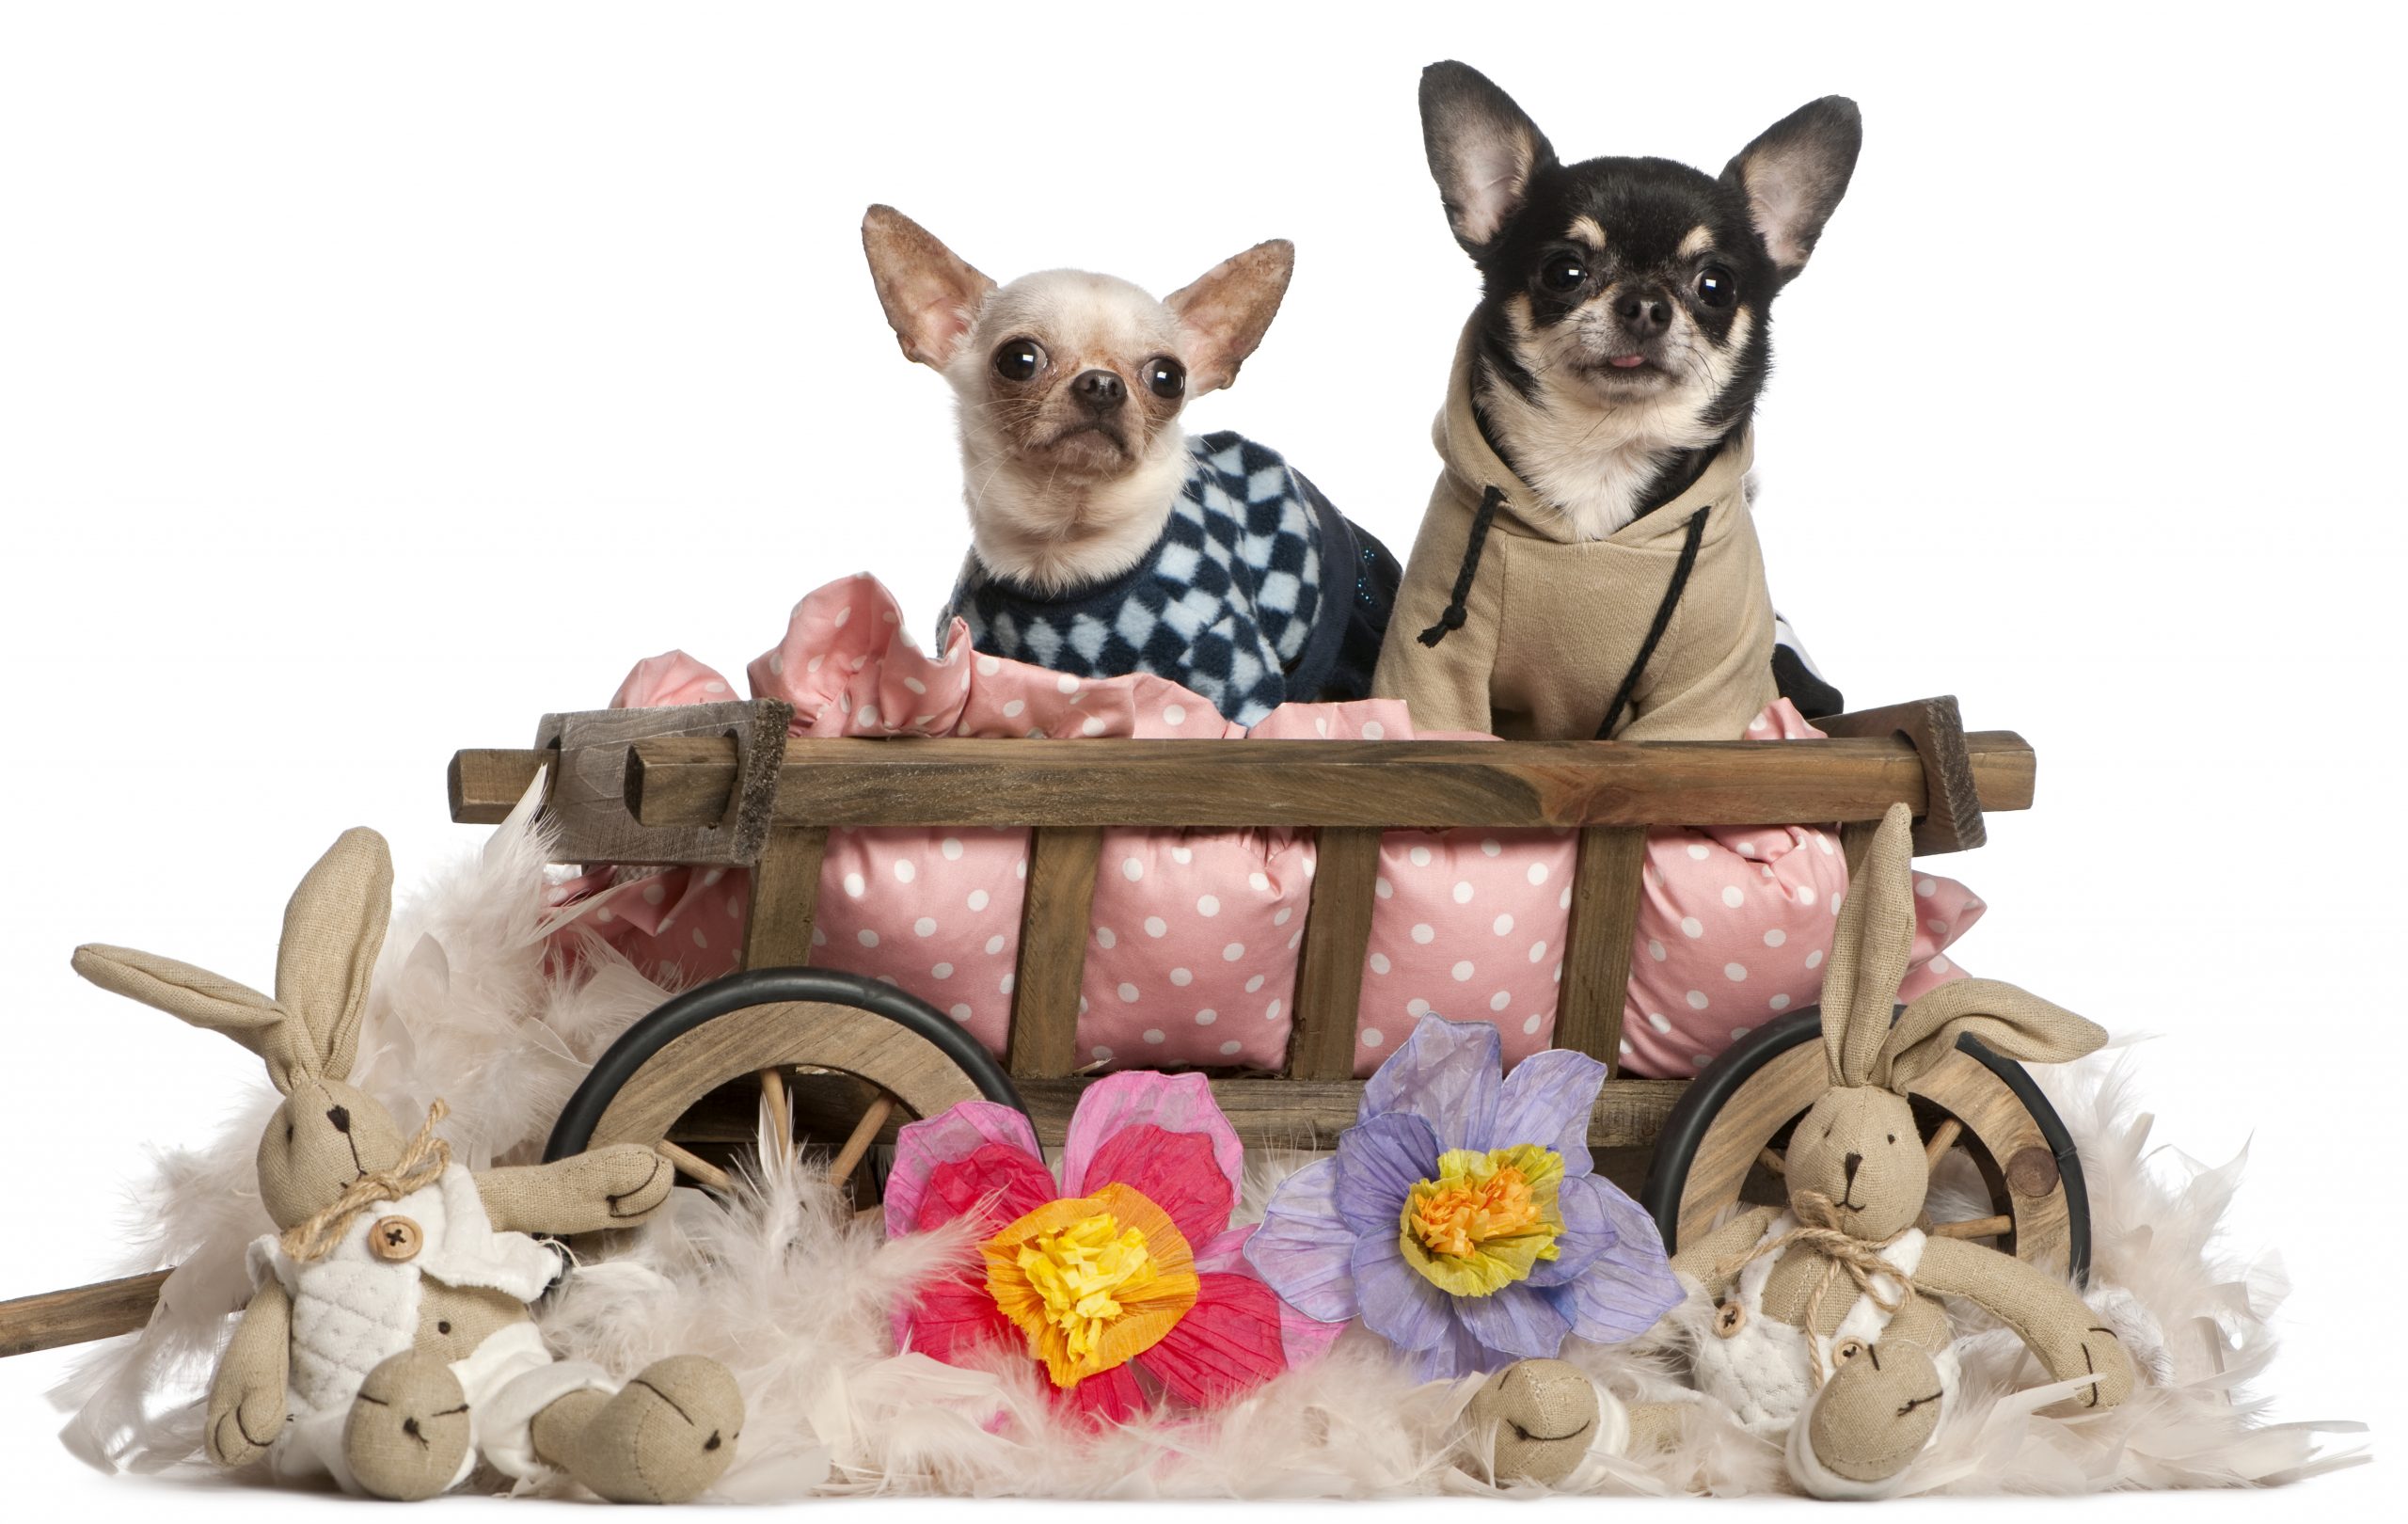 Chihuahuas sitting in dog bed wagon with stuffed animals in front of white background